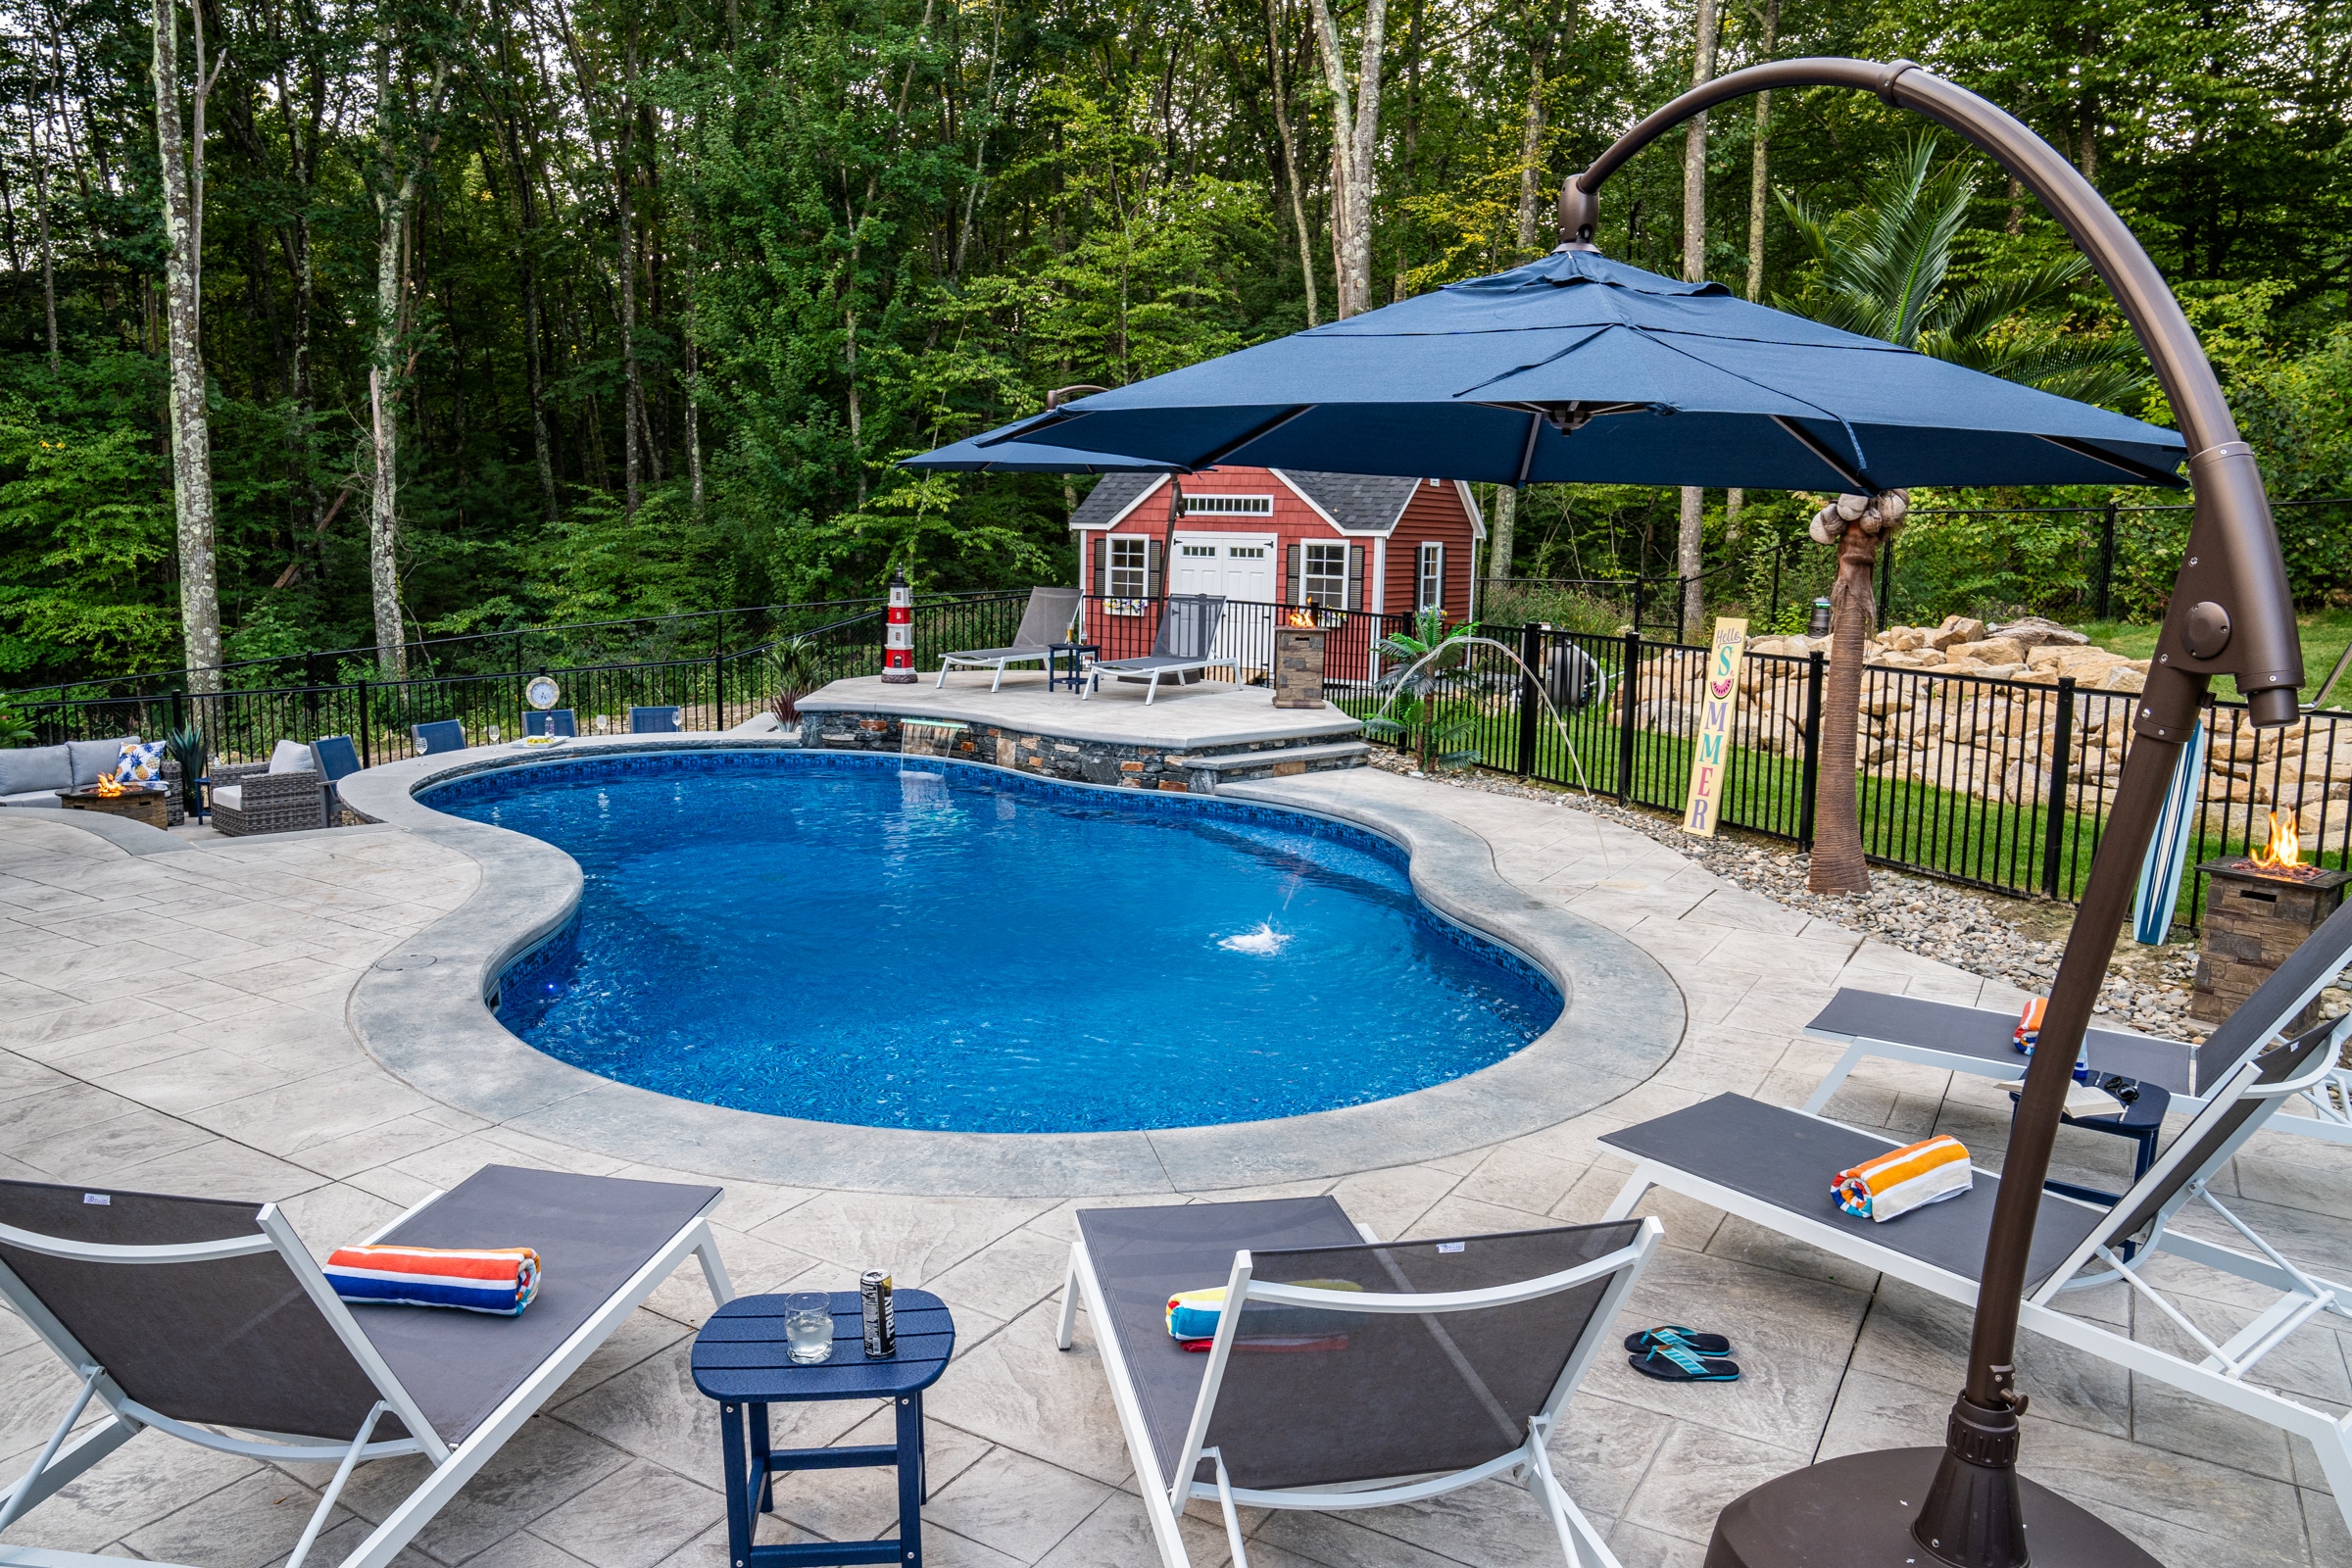 Lounge chairs sit on the stamped concrete pool deck at this Dex by Terra hardscape project in Northbridge, Massachusetts.